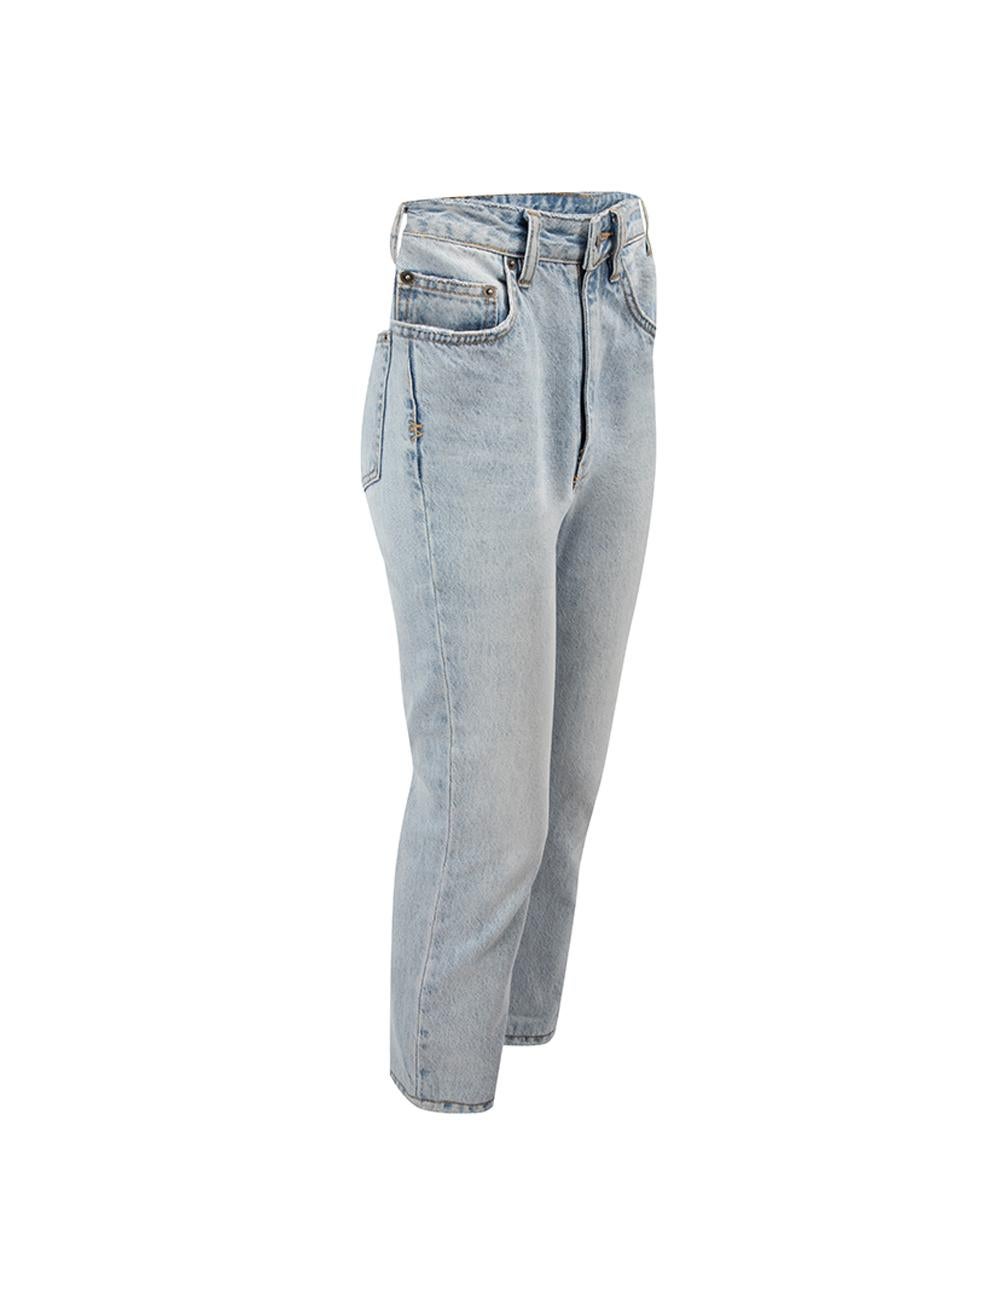 CONDITION is Very good. Hardly any visible wear to jeans is evident on this used Ksubi designer resale item. 



Details


Light blue

Denim

Straight leg trousers

High rise

Distressed accent on waistband

Embroidery details

Front zip closure